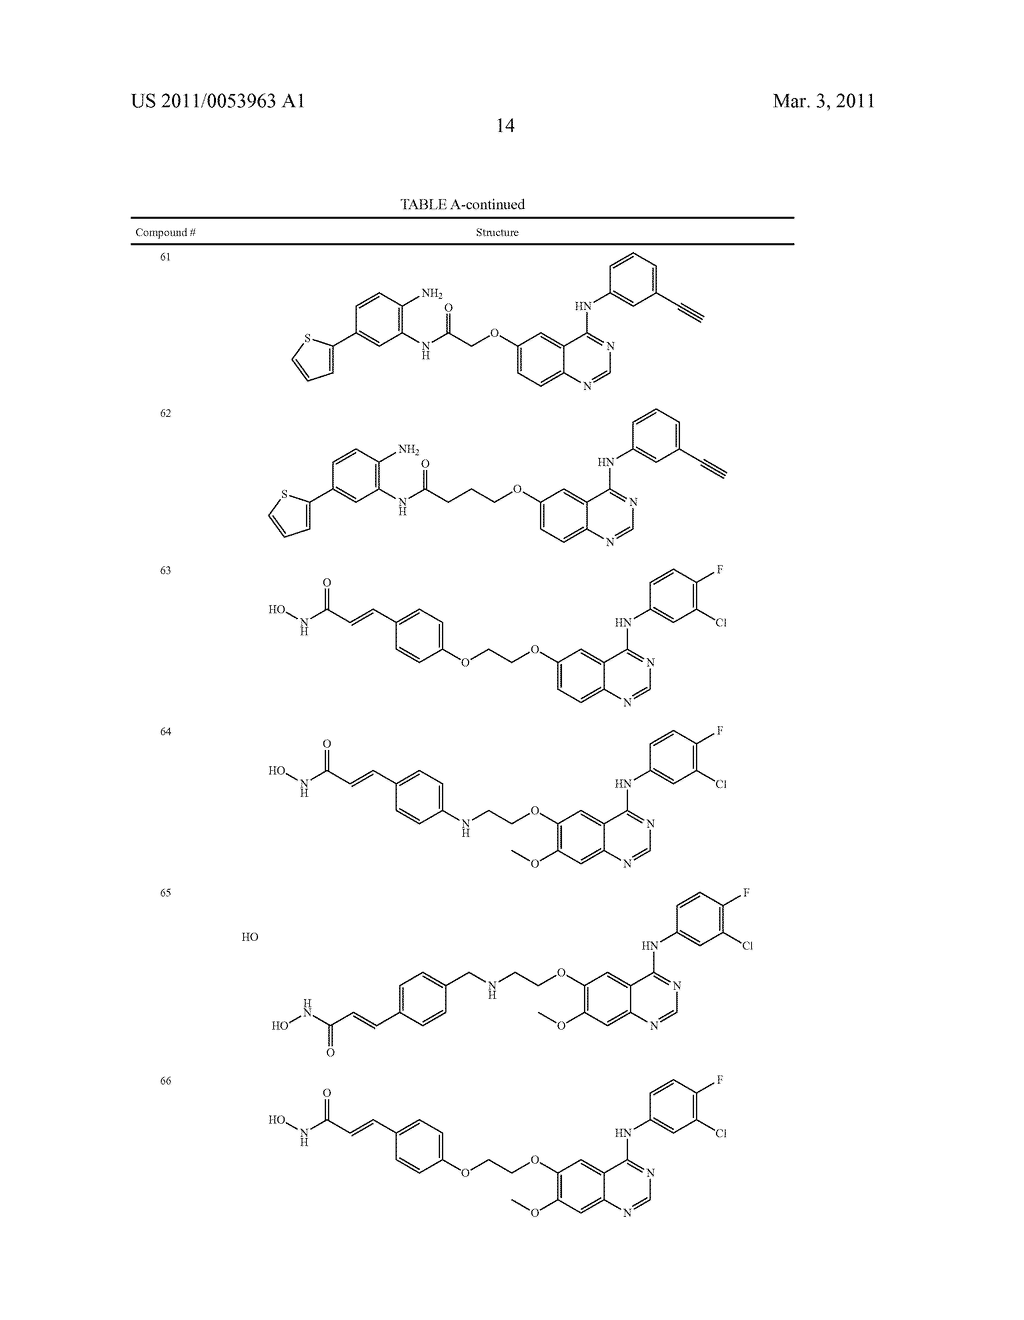 TARTRATE SALTS OF QUINAZOLINE BASED EGFR INHIBITORS CONTAINING A ZINC BINDING MOIETY - diagram, schematic, and image 35